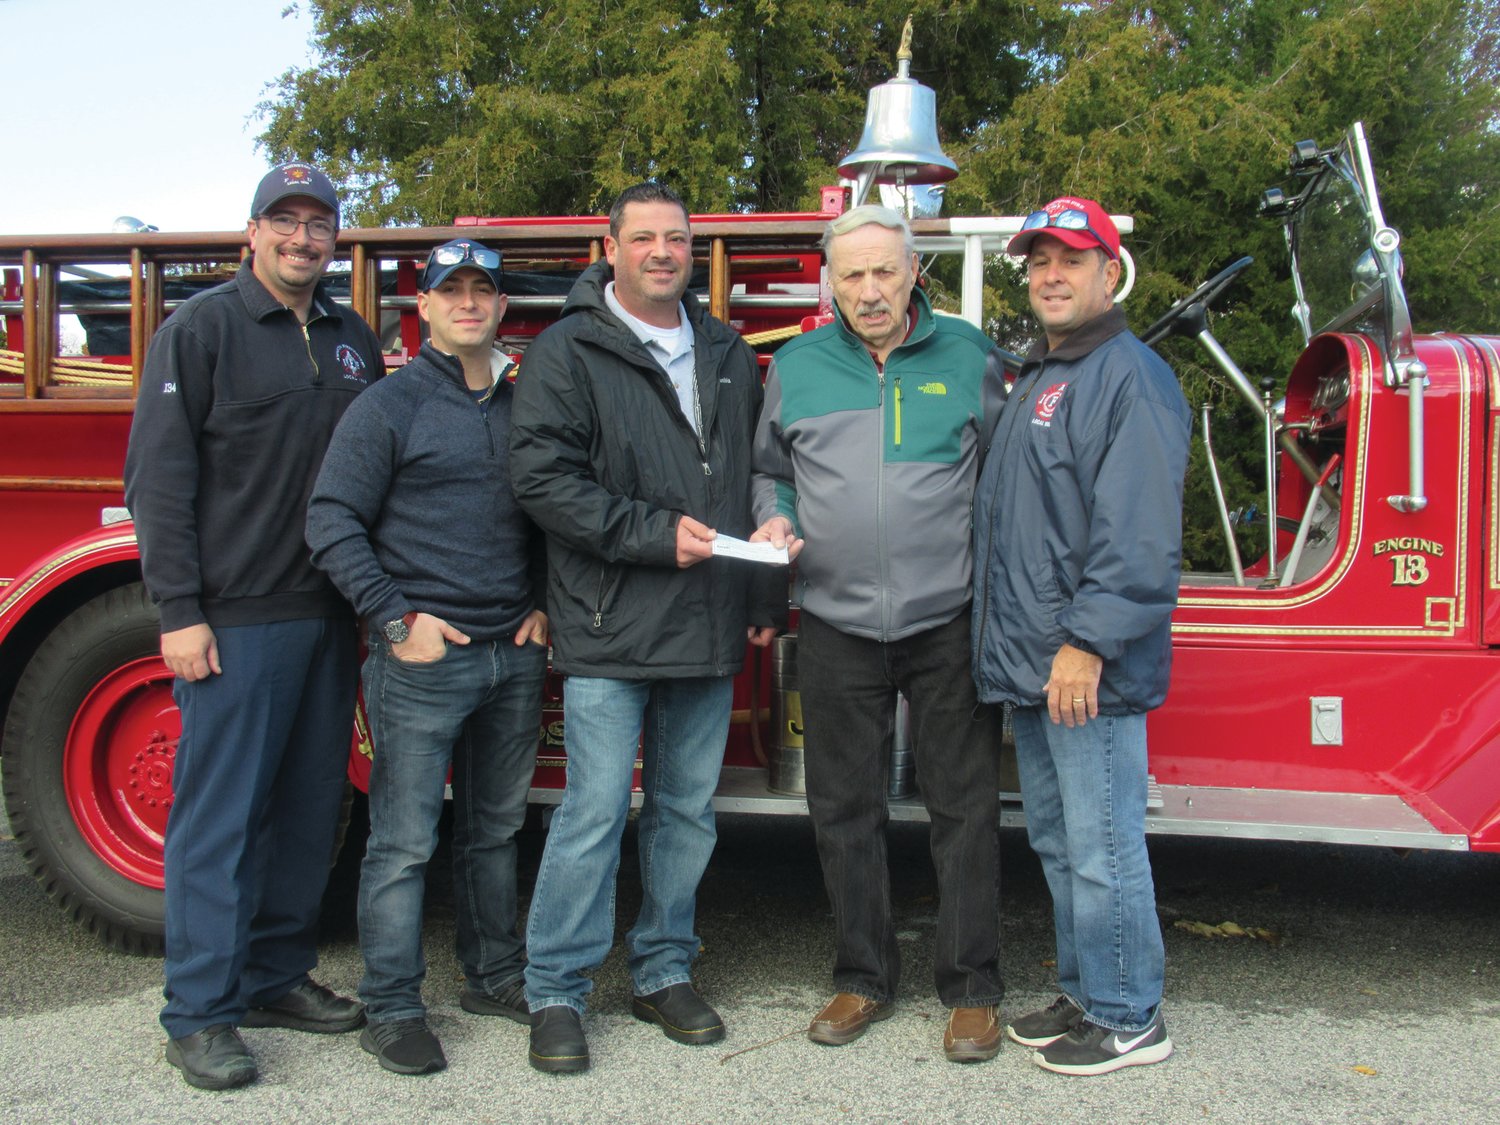 HISTORIC HAPPENING: Former JFD Chief Alan Zambarano presents JFD Lt. Jon Pistacchio with a check from the former Johnston Hose  Volunteer Company No. 1 that local 1950 will use in its continuing giving back to the community. Also taking part were Firefighters Scott Thacker, Chris DelFino and Lt. David Pingitore.